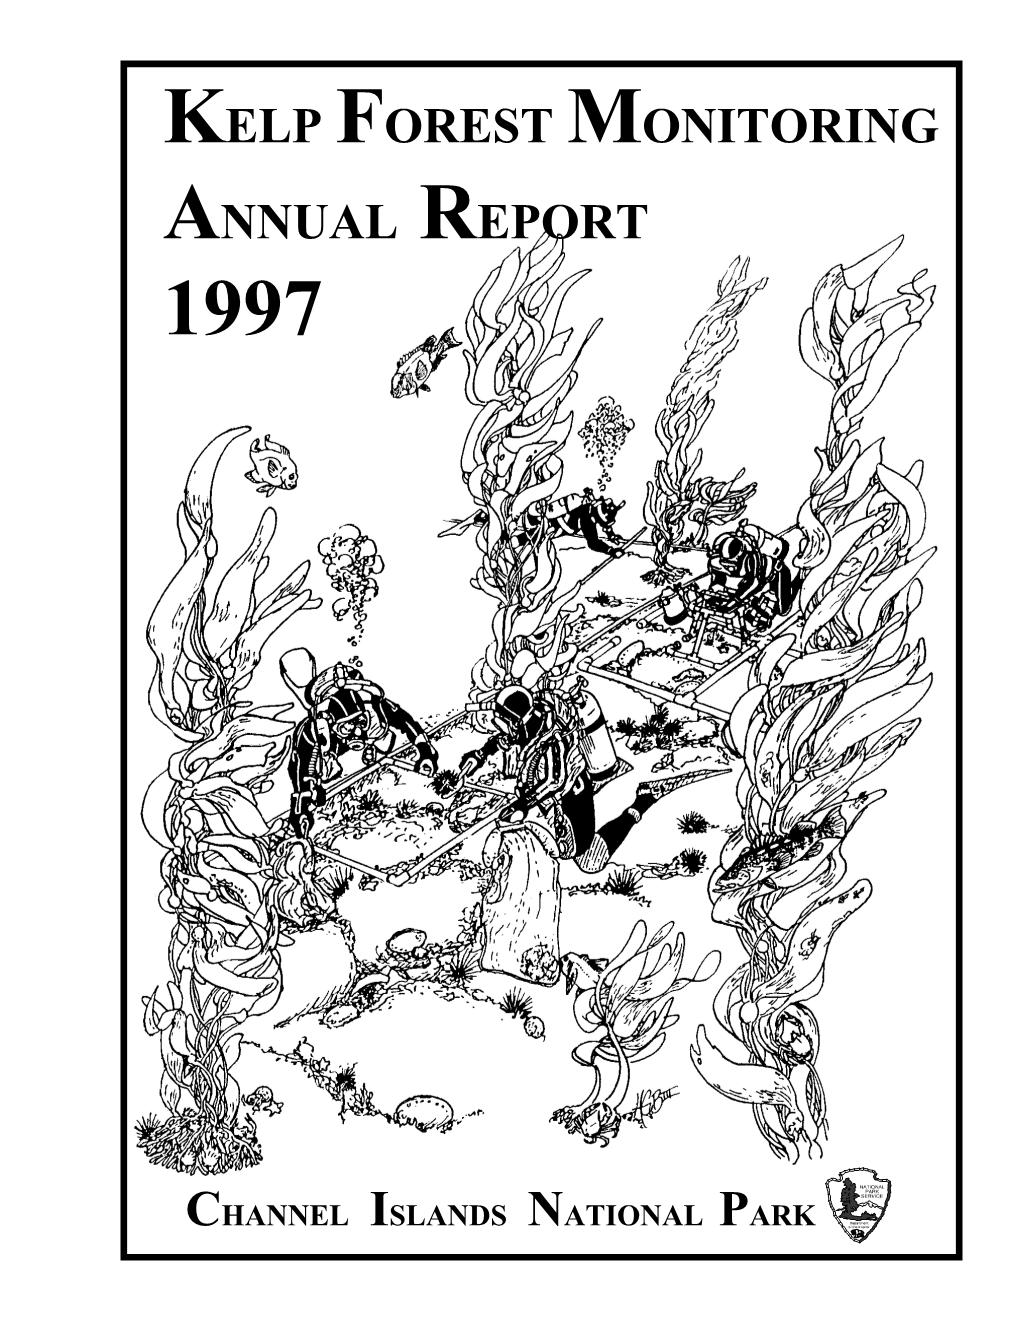 Kelp Forest Monitoring Annual Report 1997